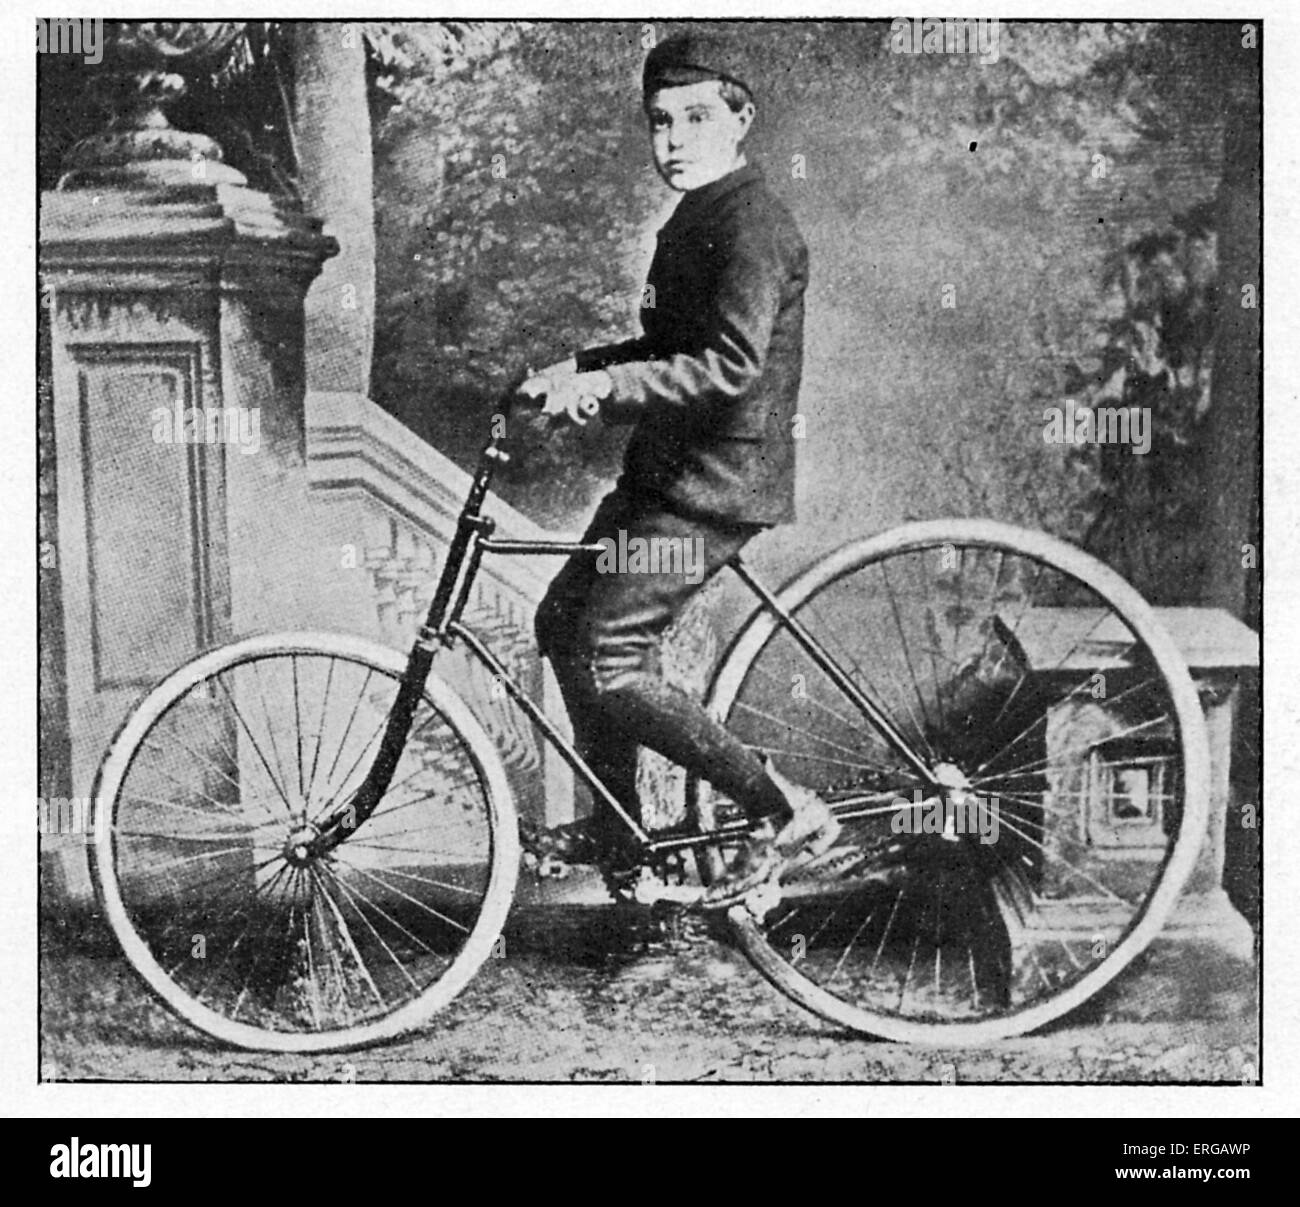 The son of J.B. Dunlop riding the first bicycle with inflatable tyres. John  Boyd Dunlop (5 February 1840 – 23 October 1921) was a Scottish inventor who  developed the first practical pneumatic